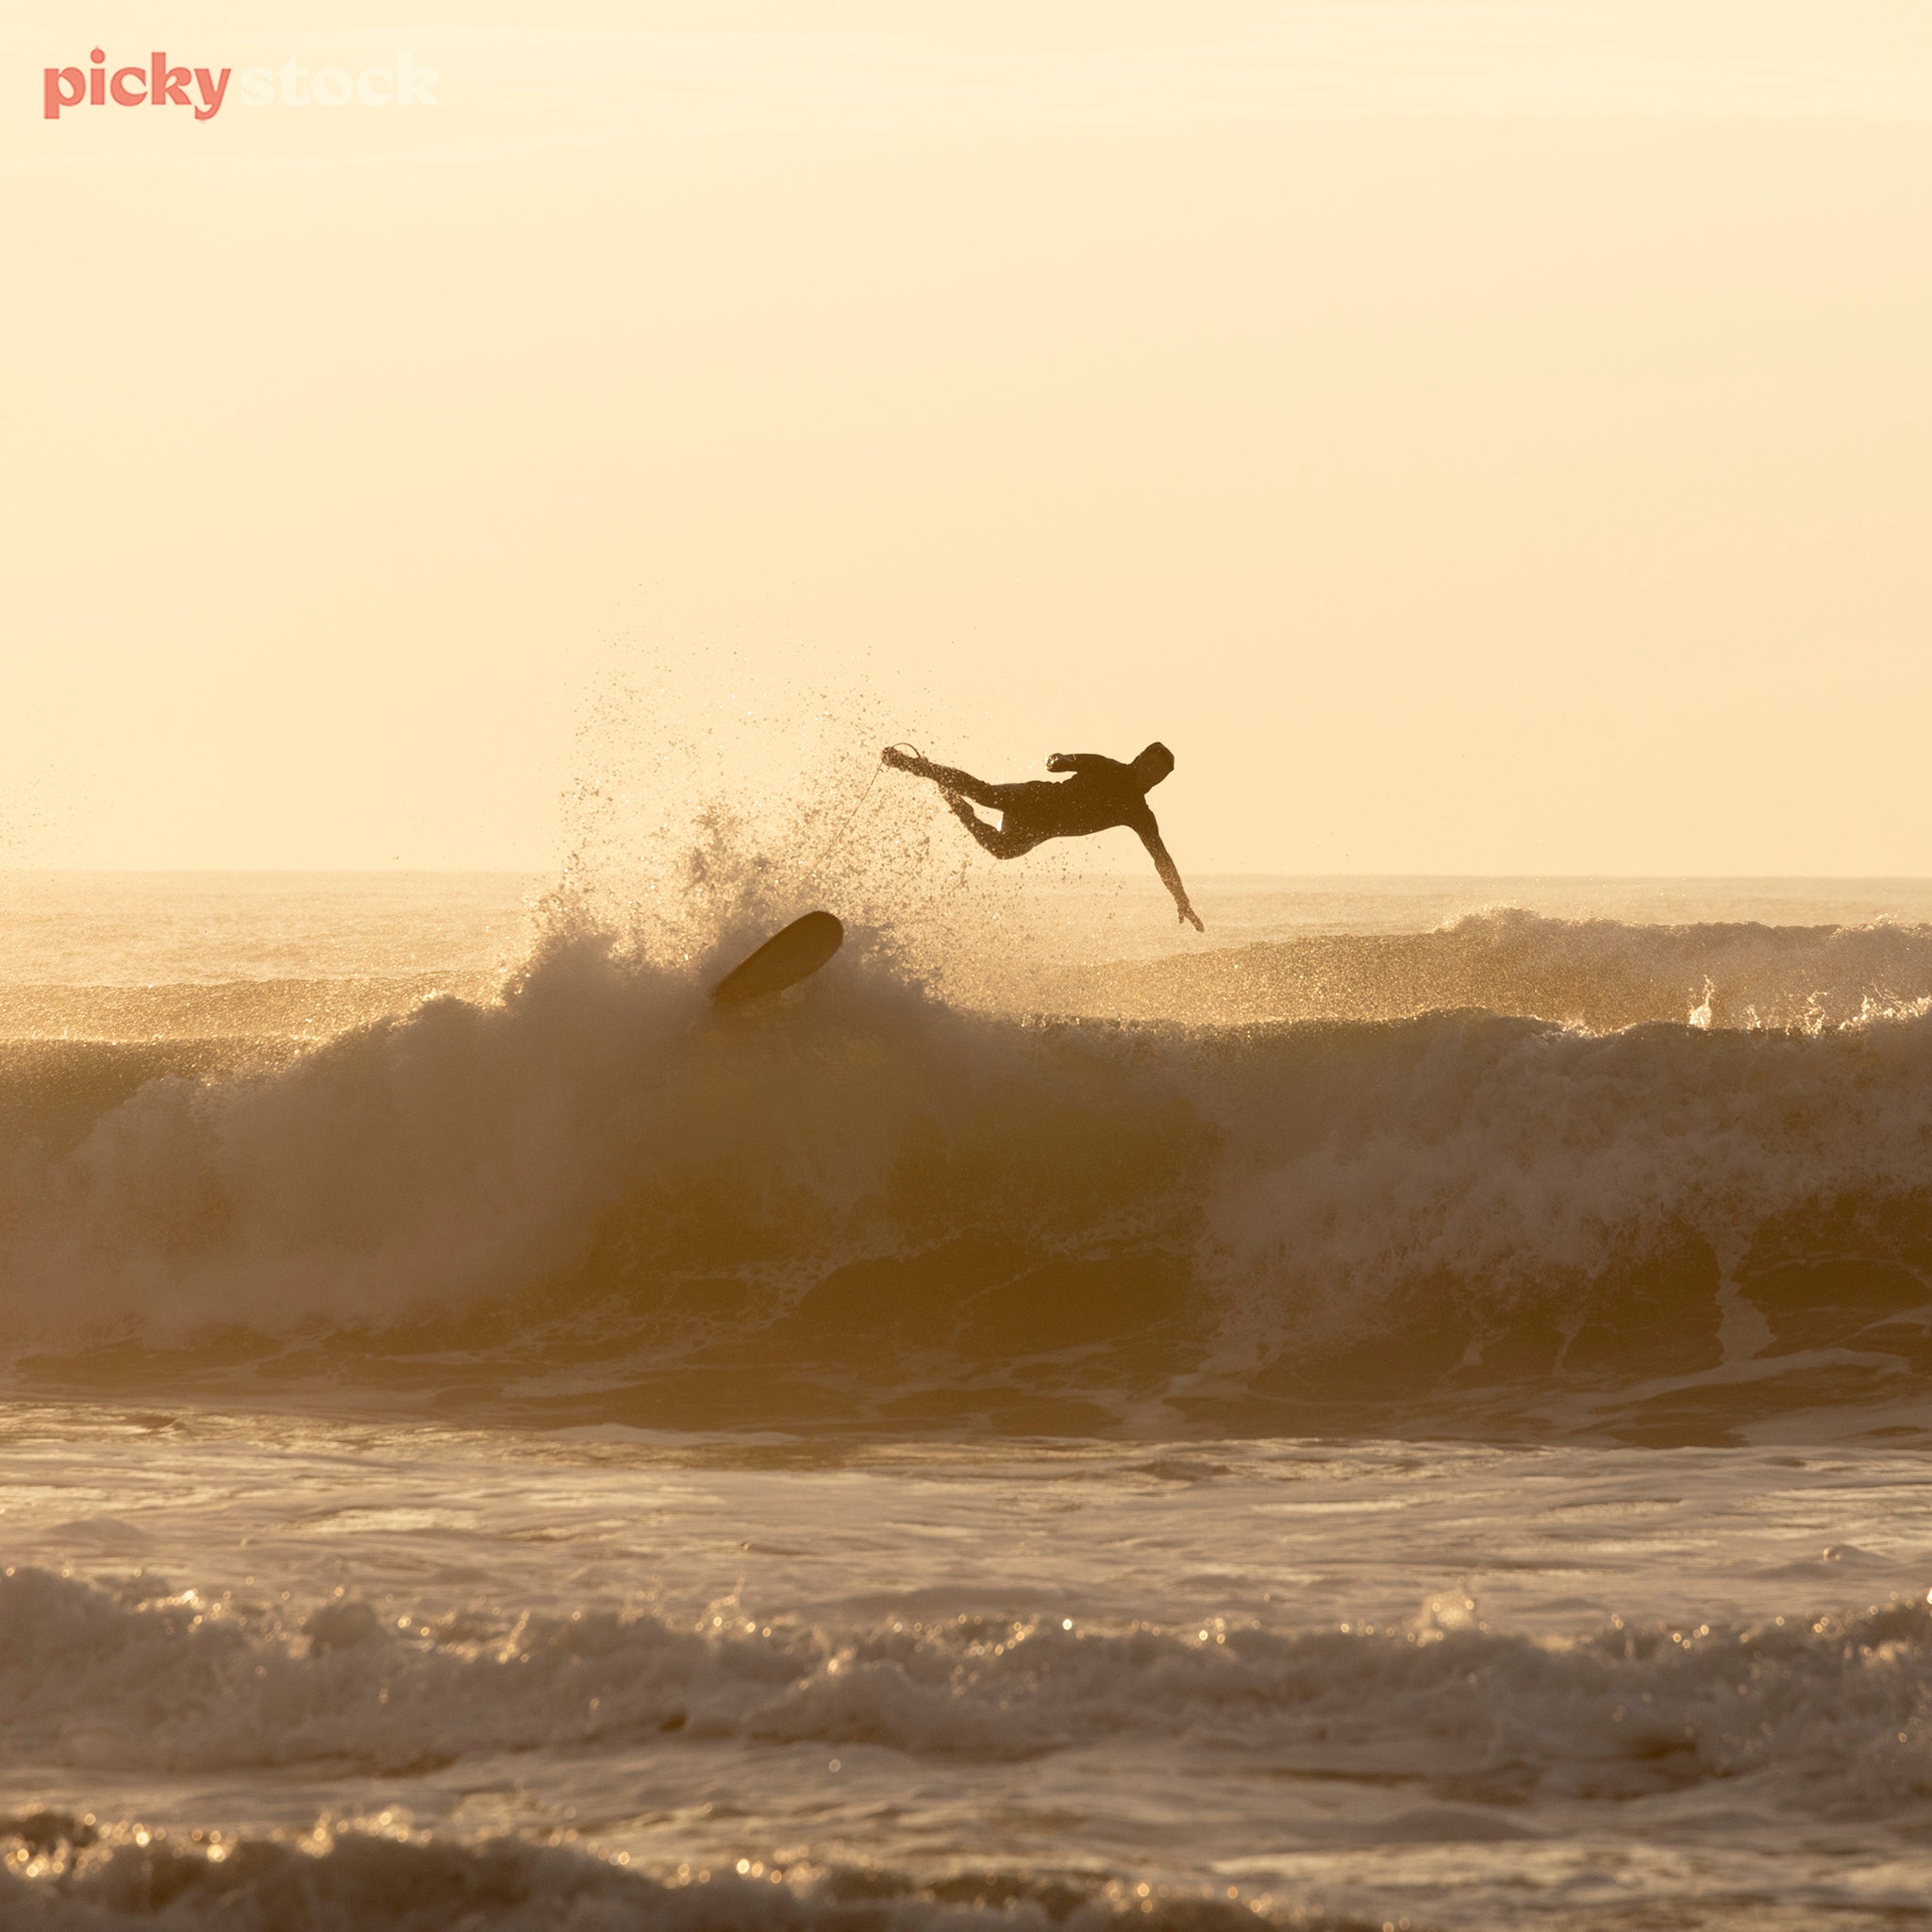 Sufer falling off surf board mid air, about to drop in to the surf. At golden hour - sunset / sunrise. 